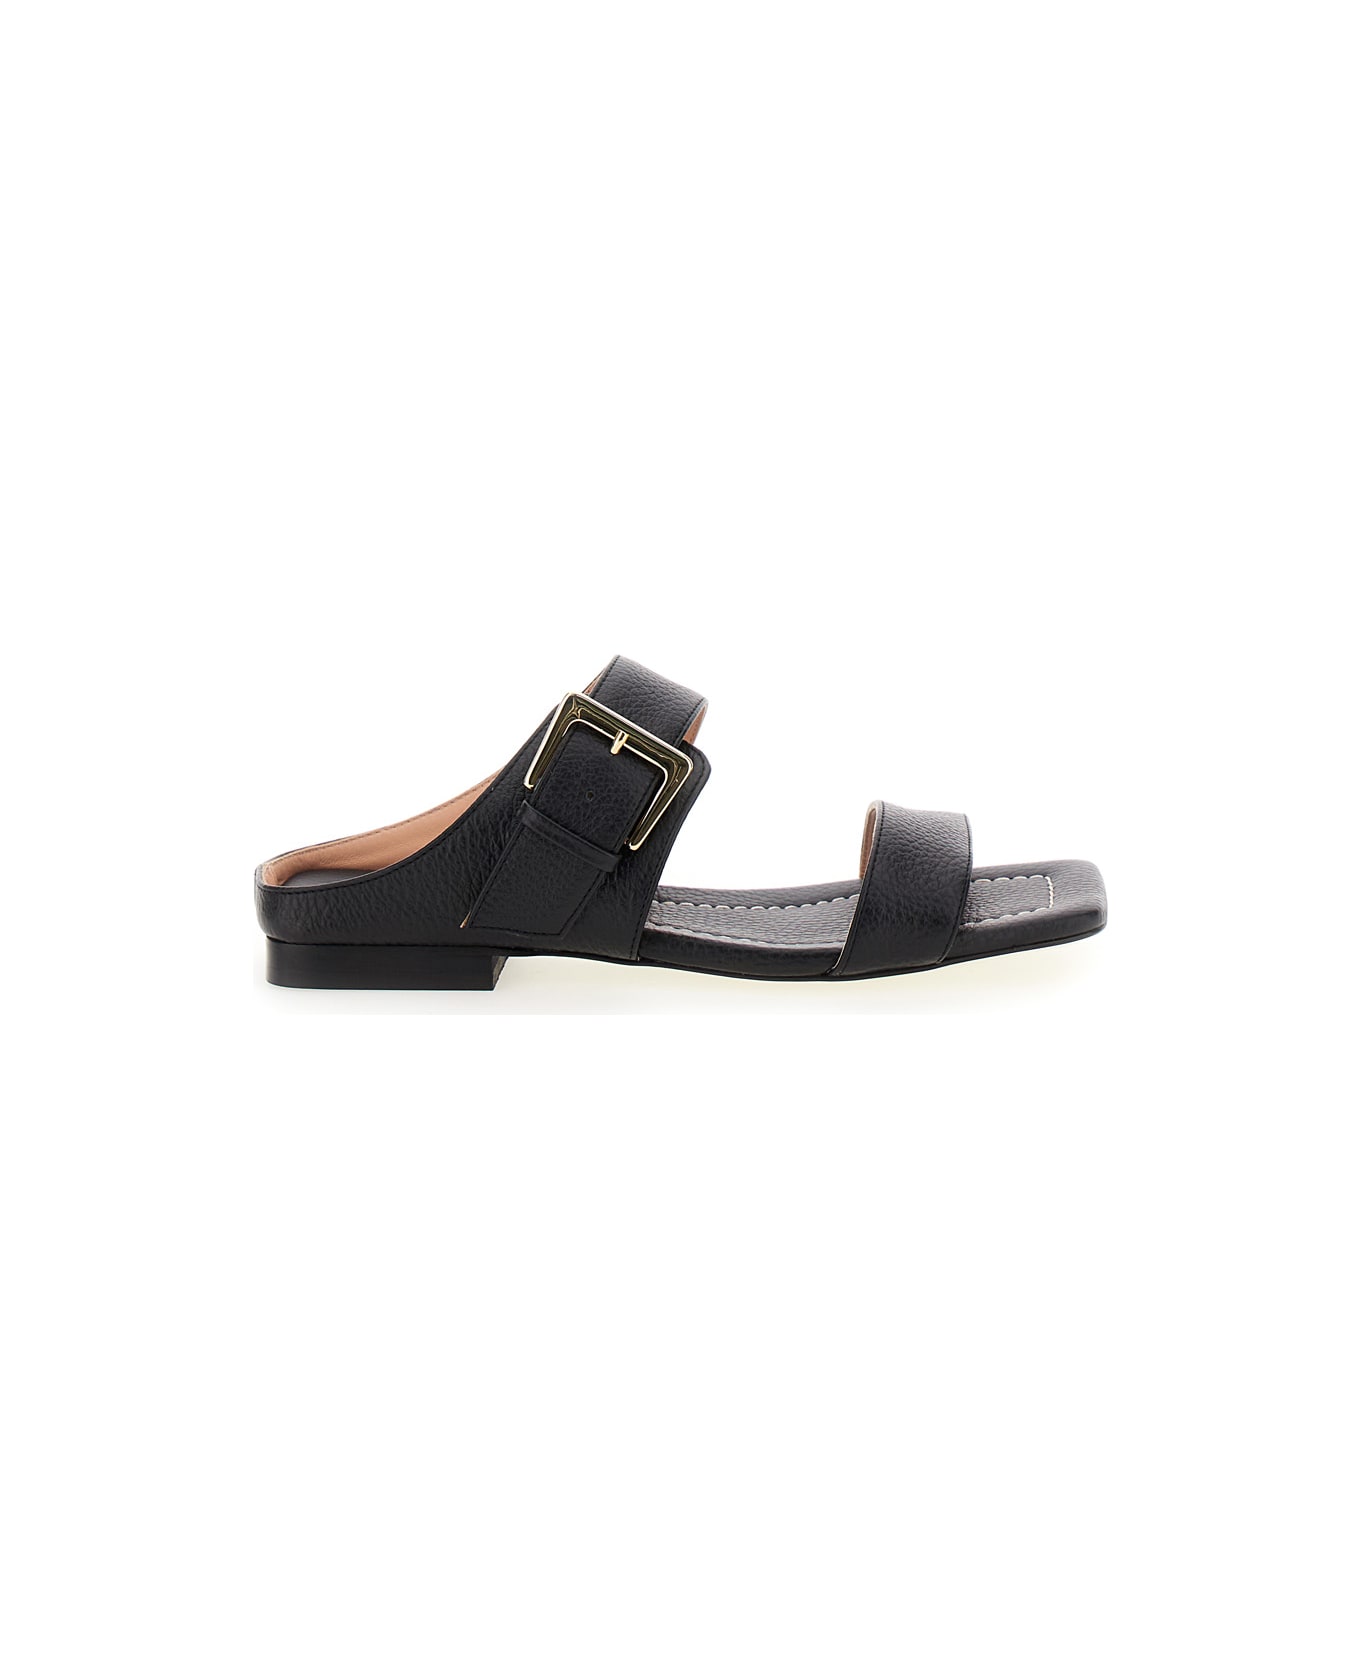 Pollini Black Sandals With Maxi Buckle In Leather Woman - Black